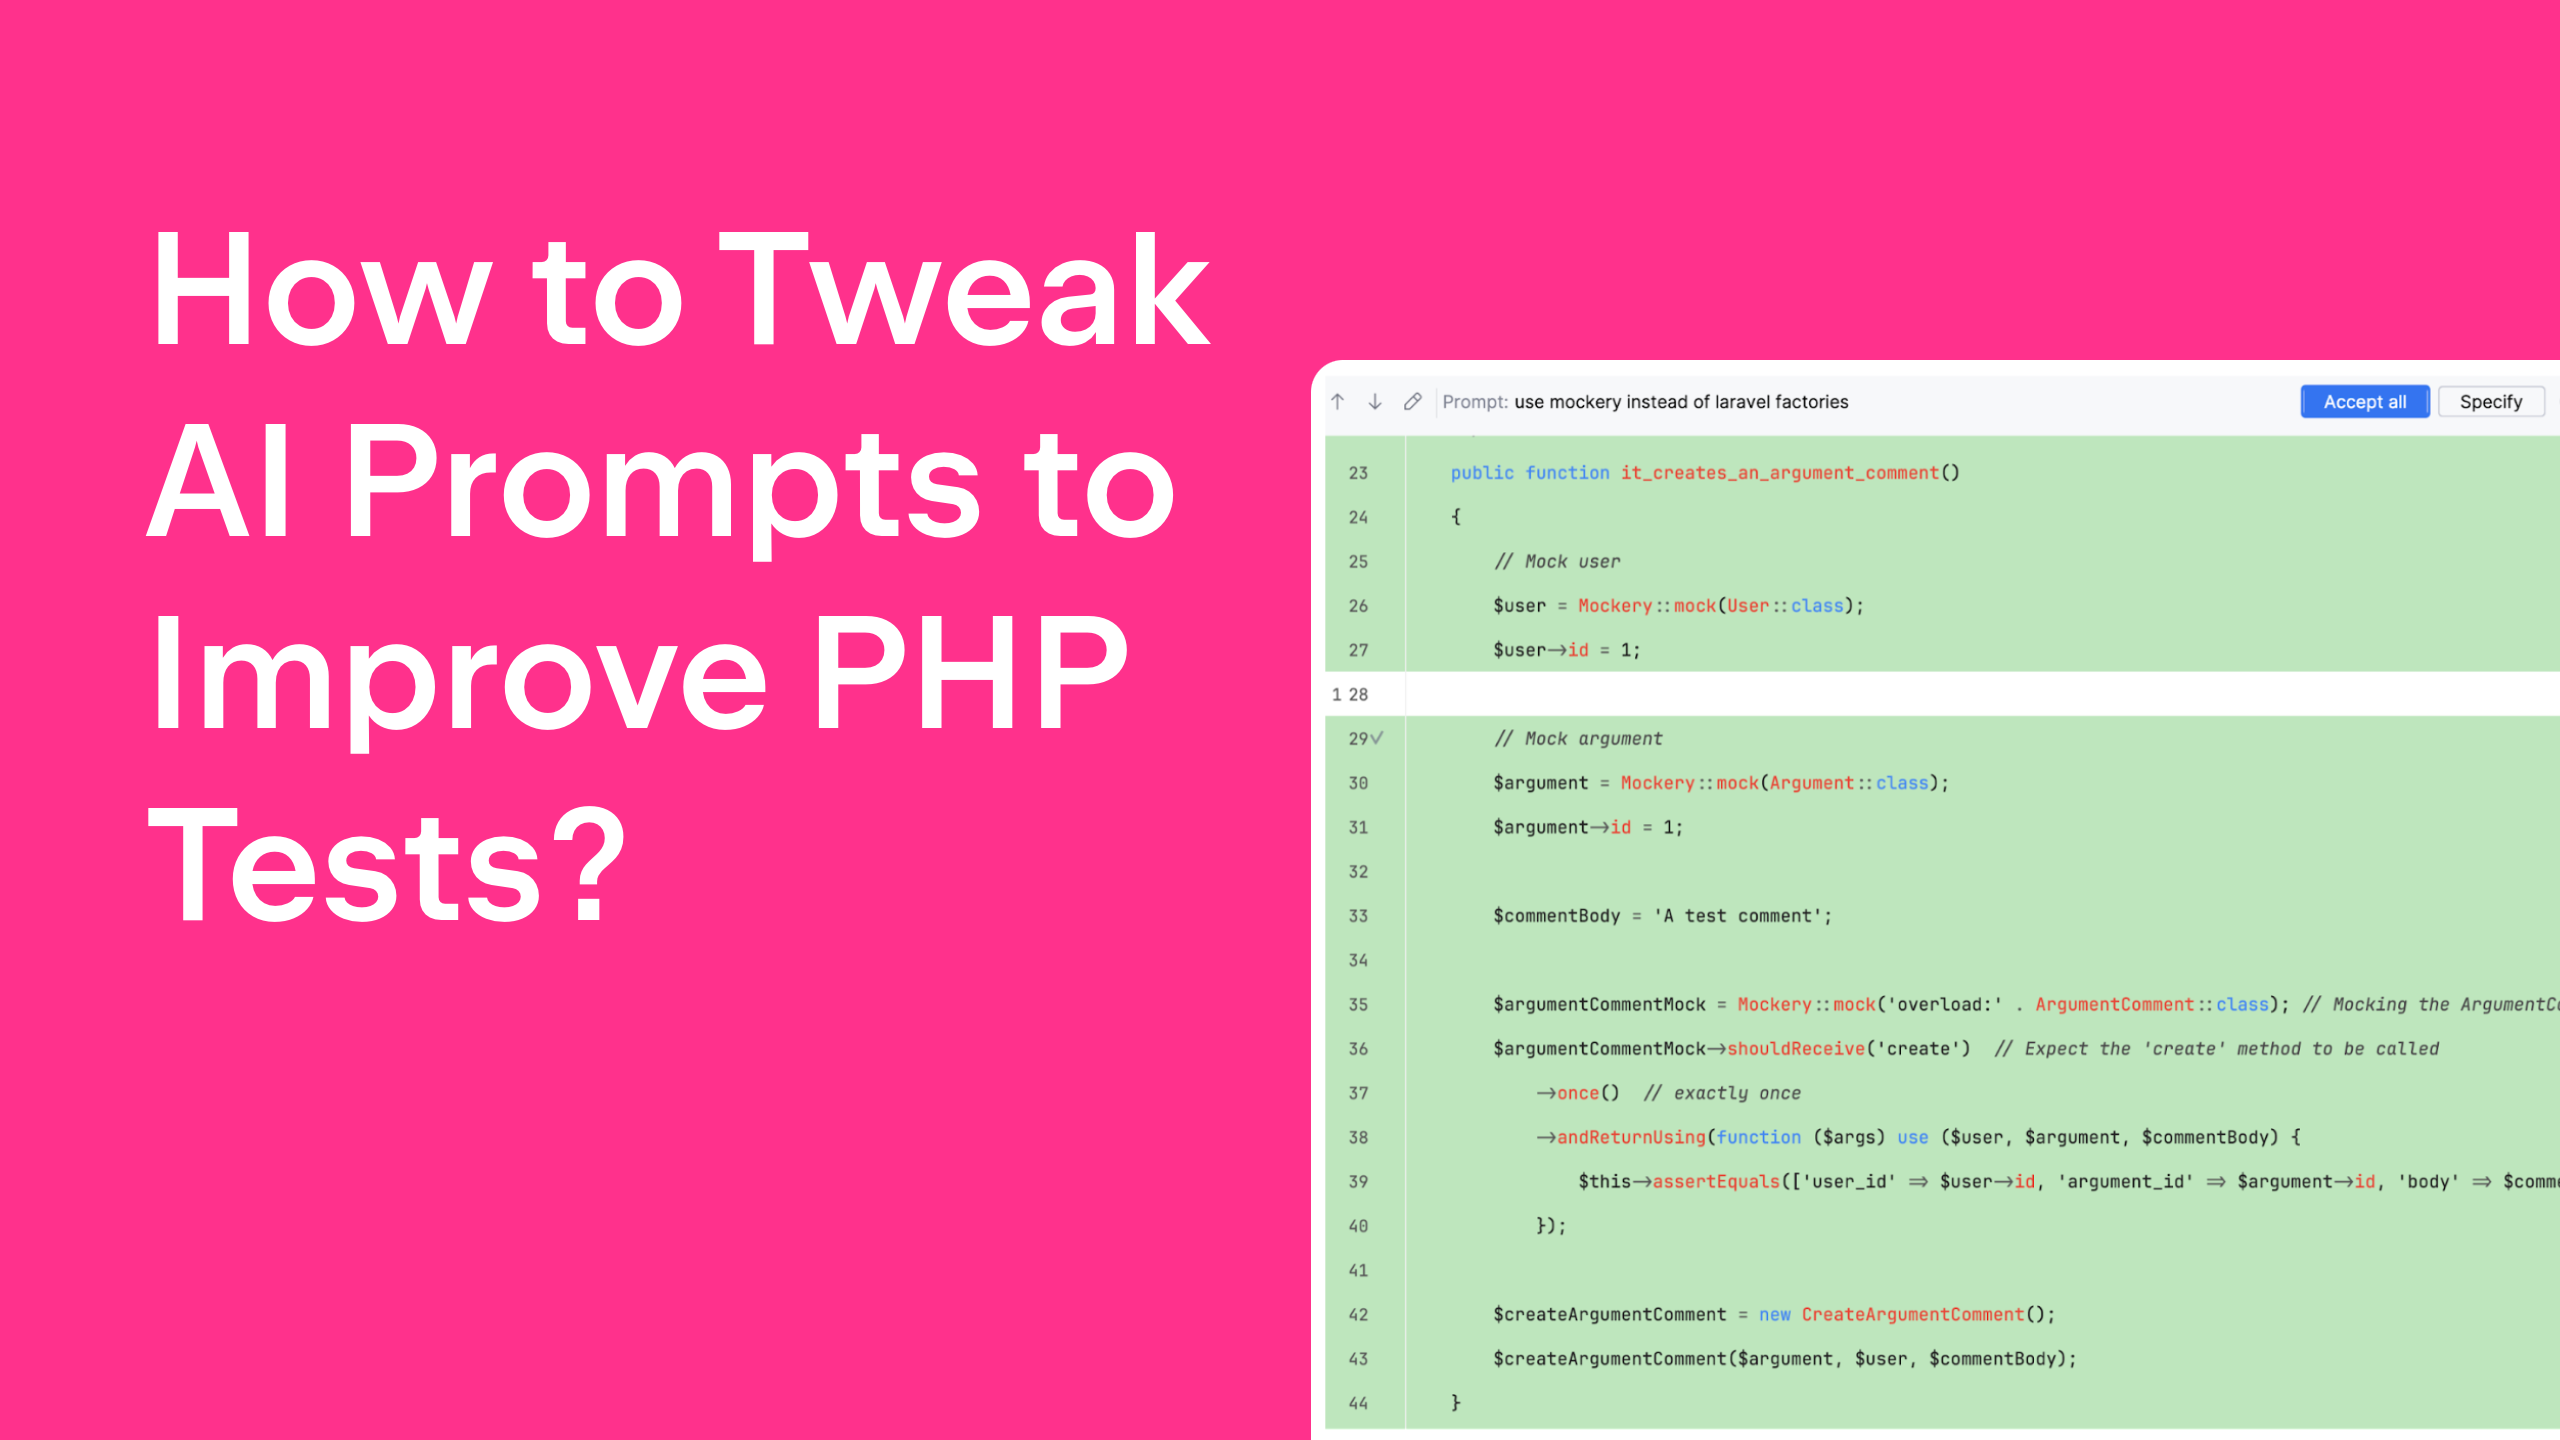 How to Tweak AI Prompts to Improve PHP Tests